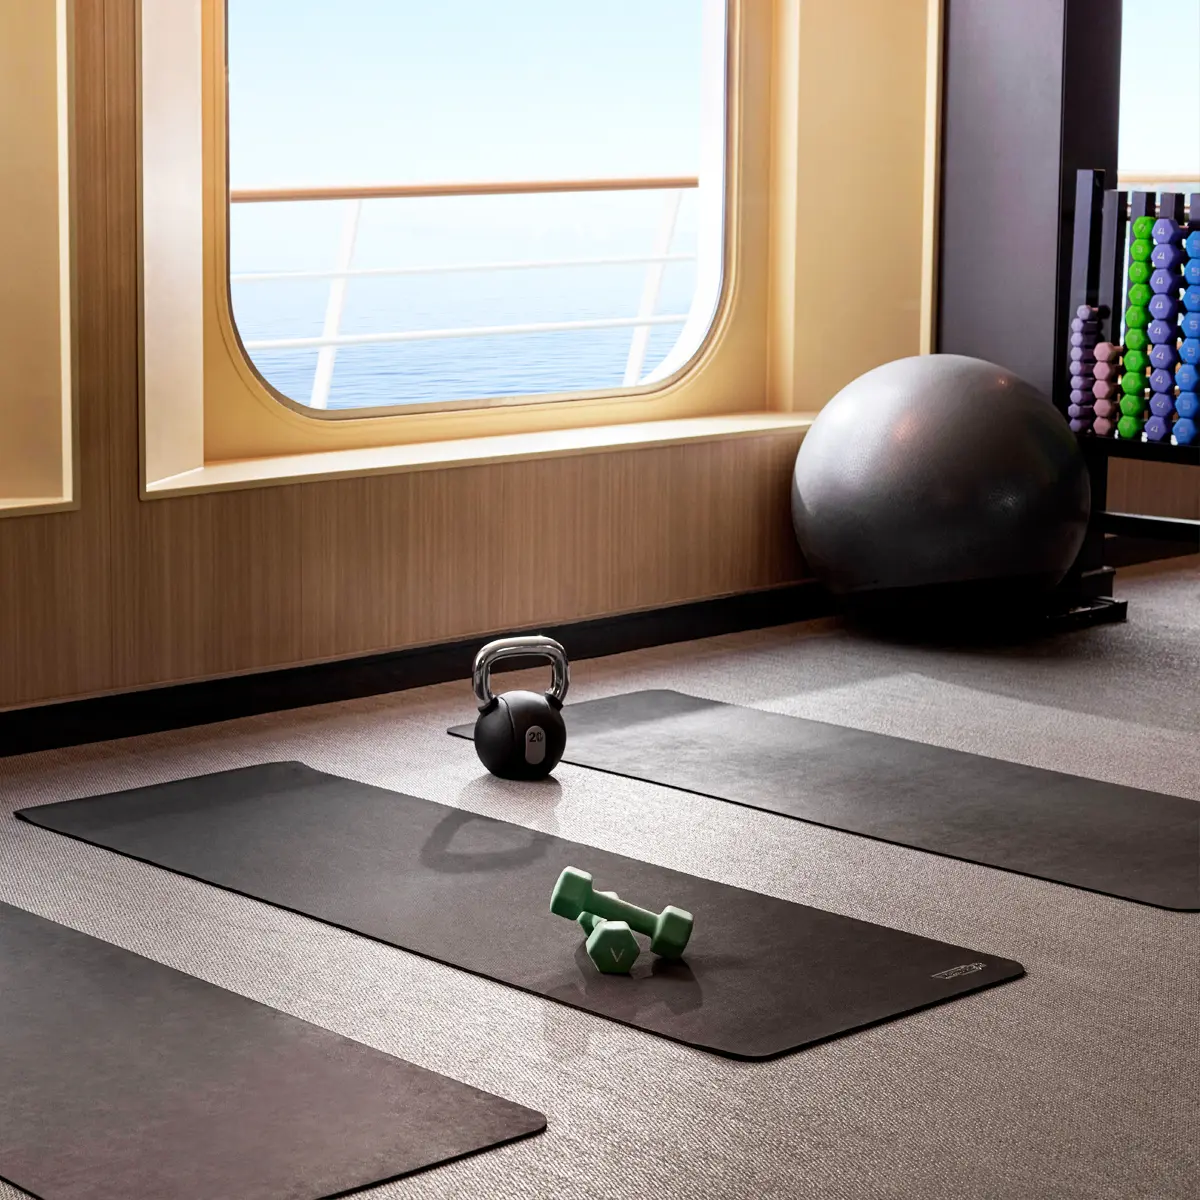 crystal cruises fitness center